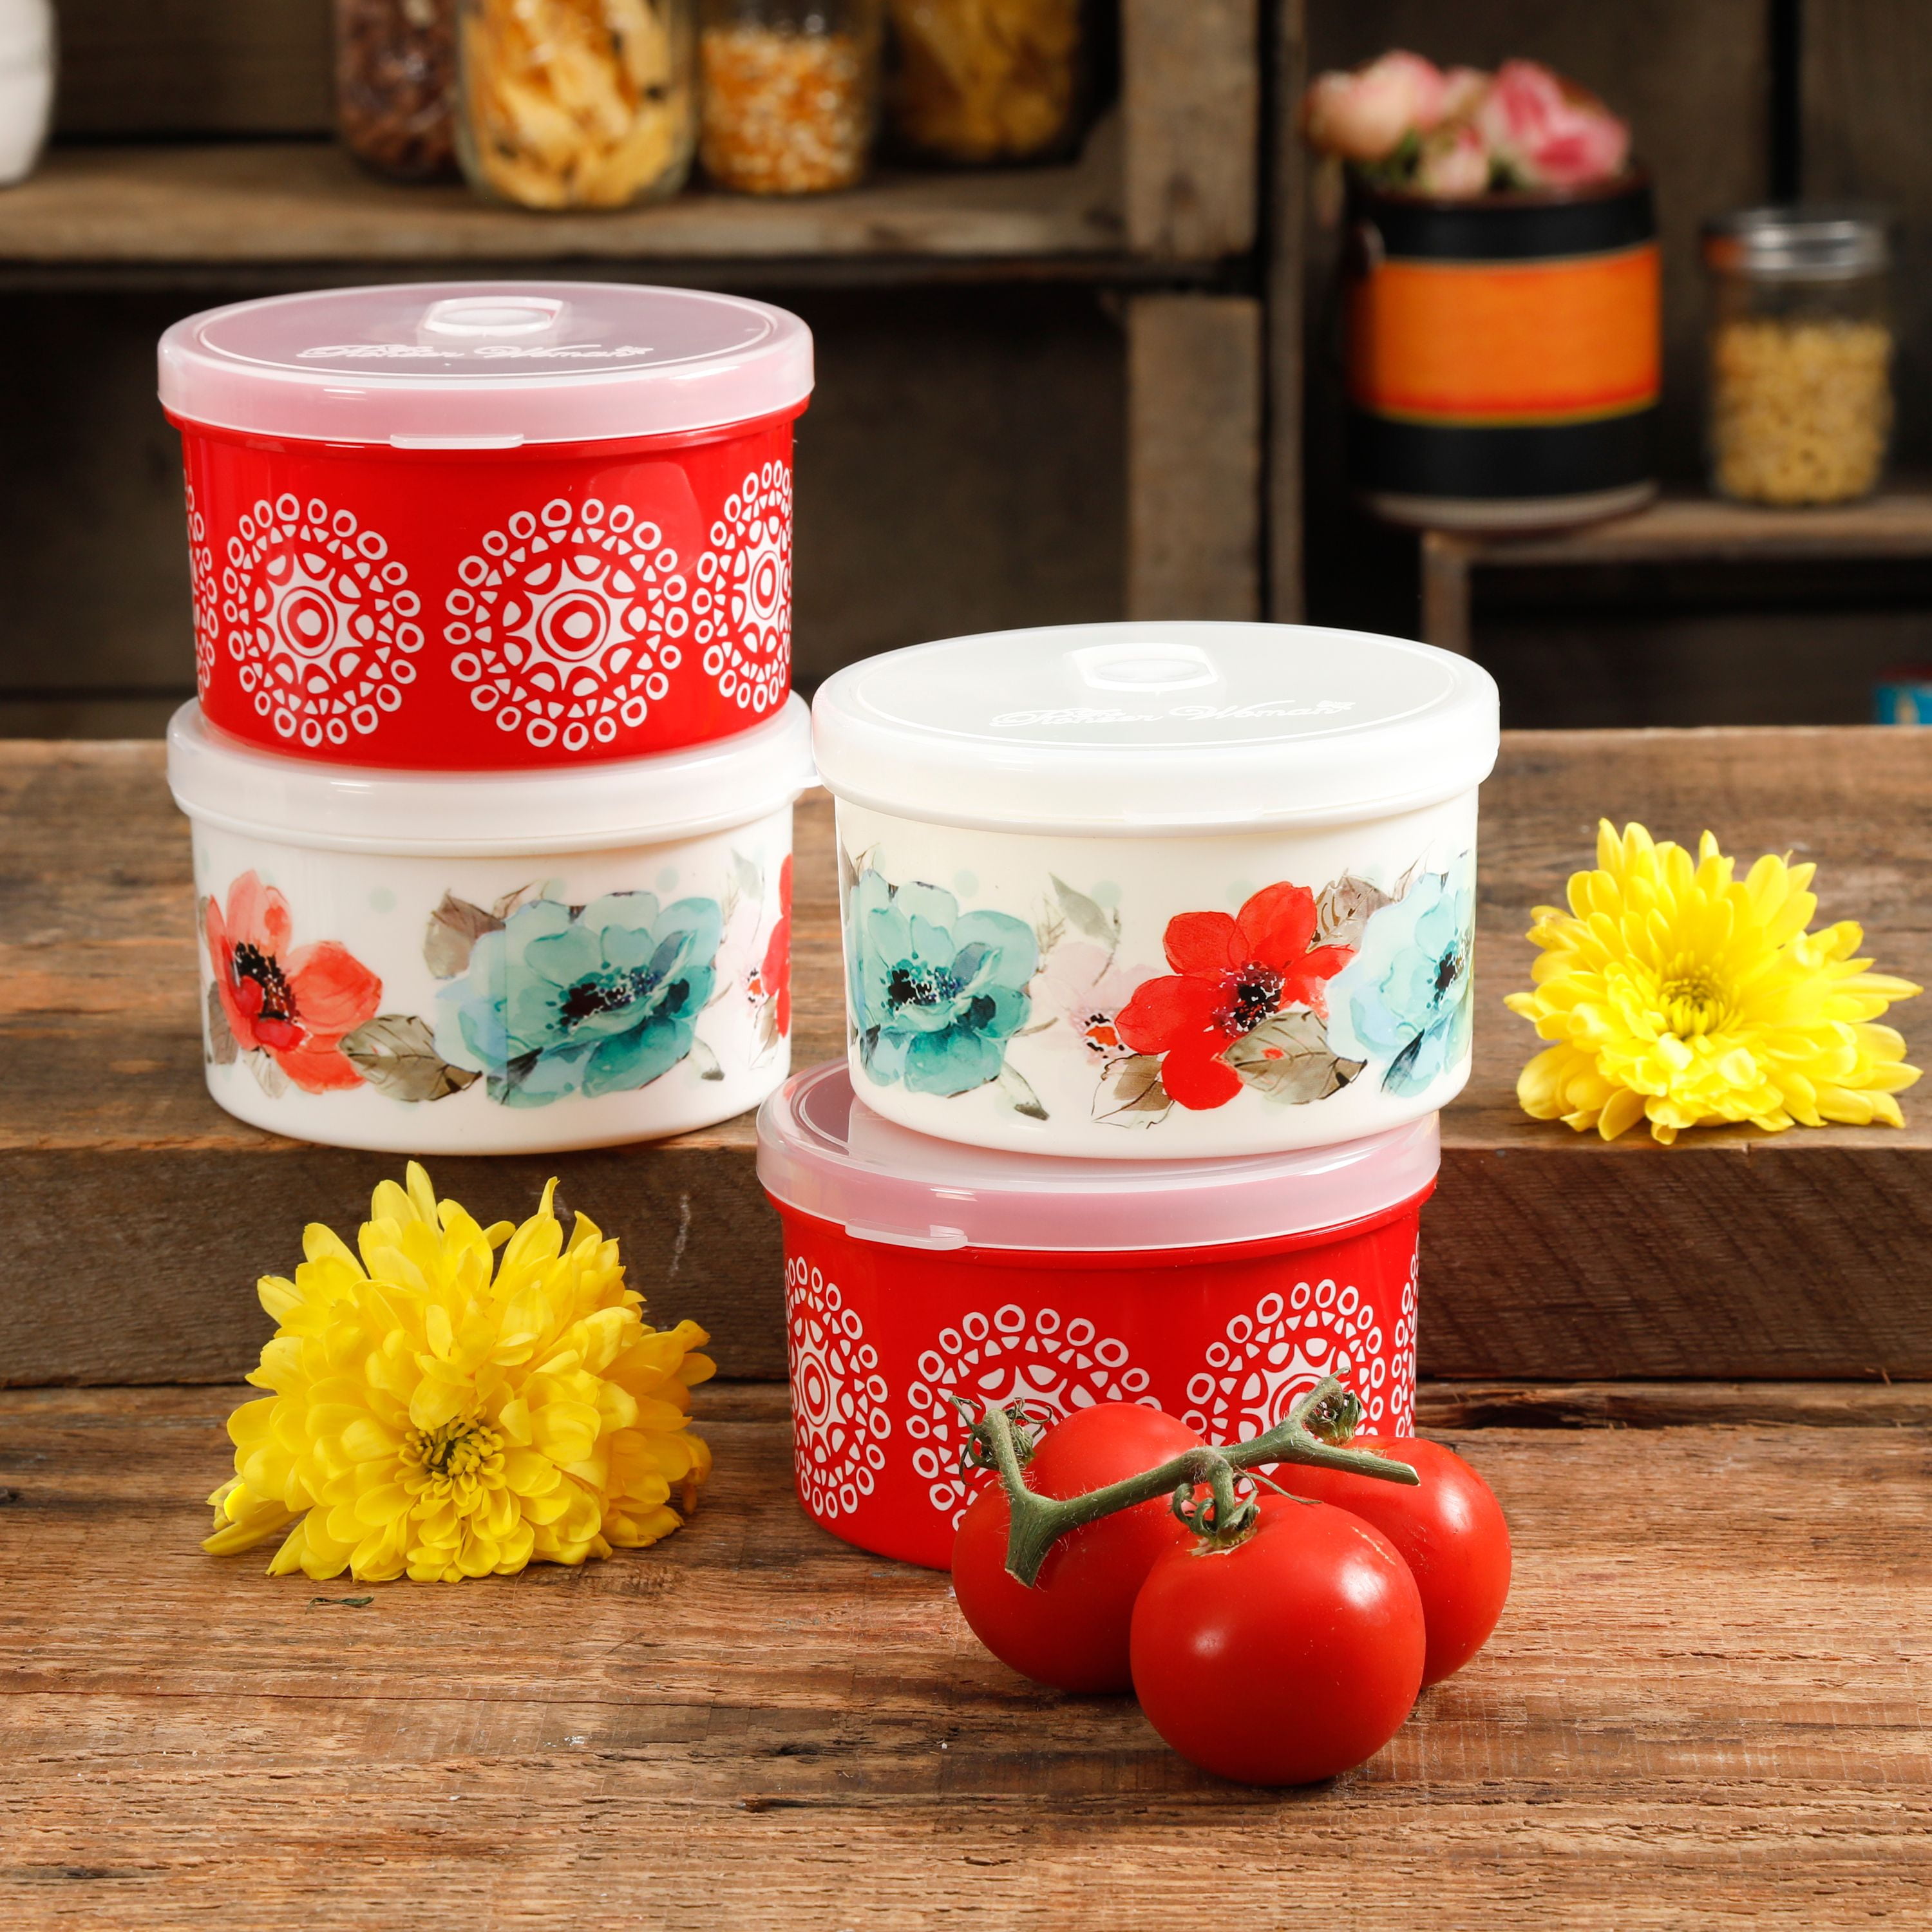 The Pioneer Woman Food Storage at Walmart - Where to Buy Ree Drummond's Storage  Container